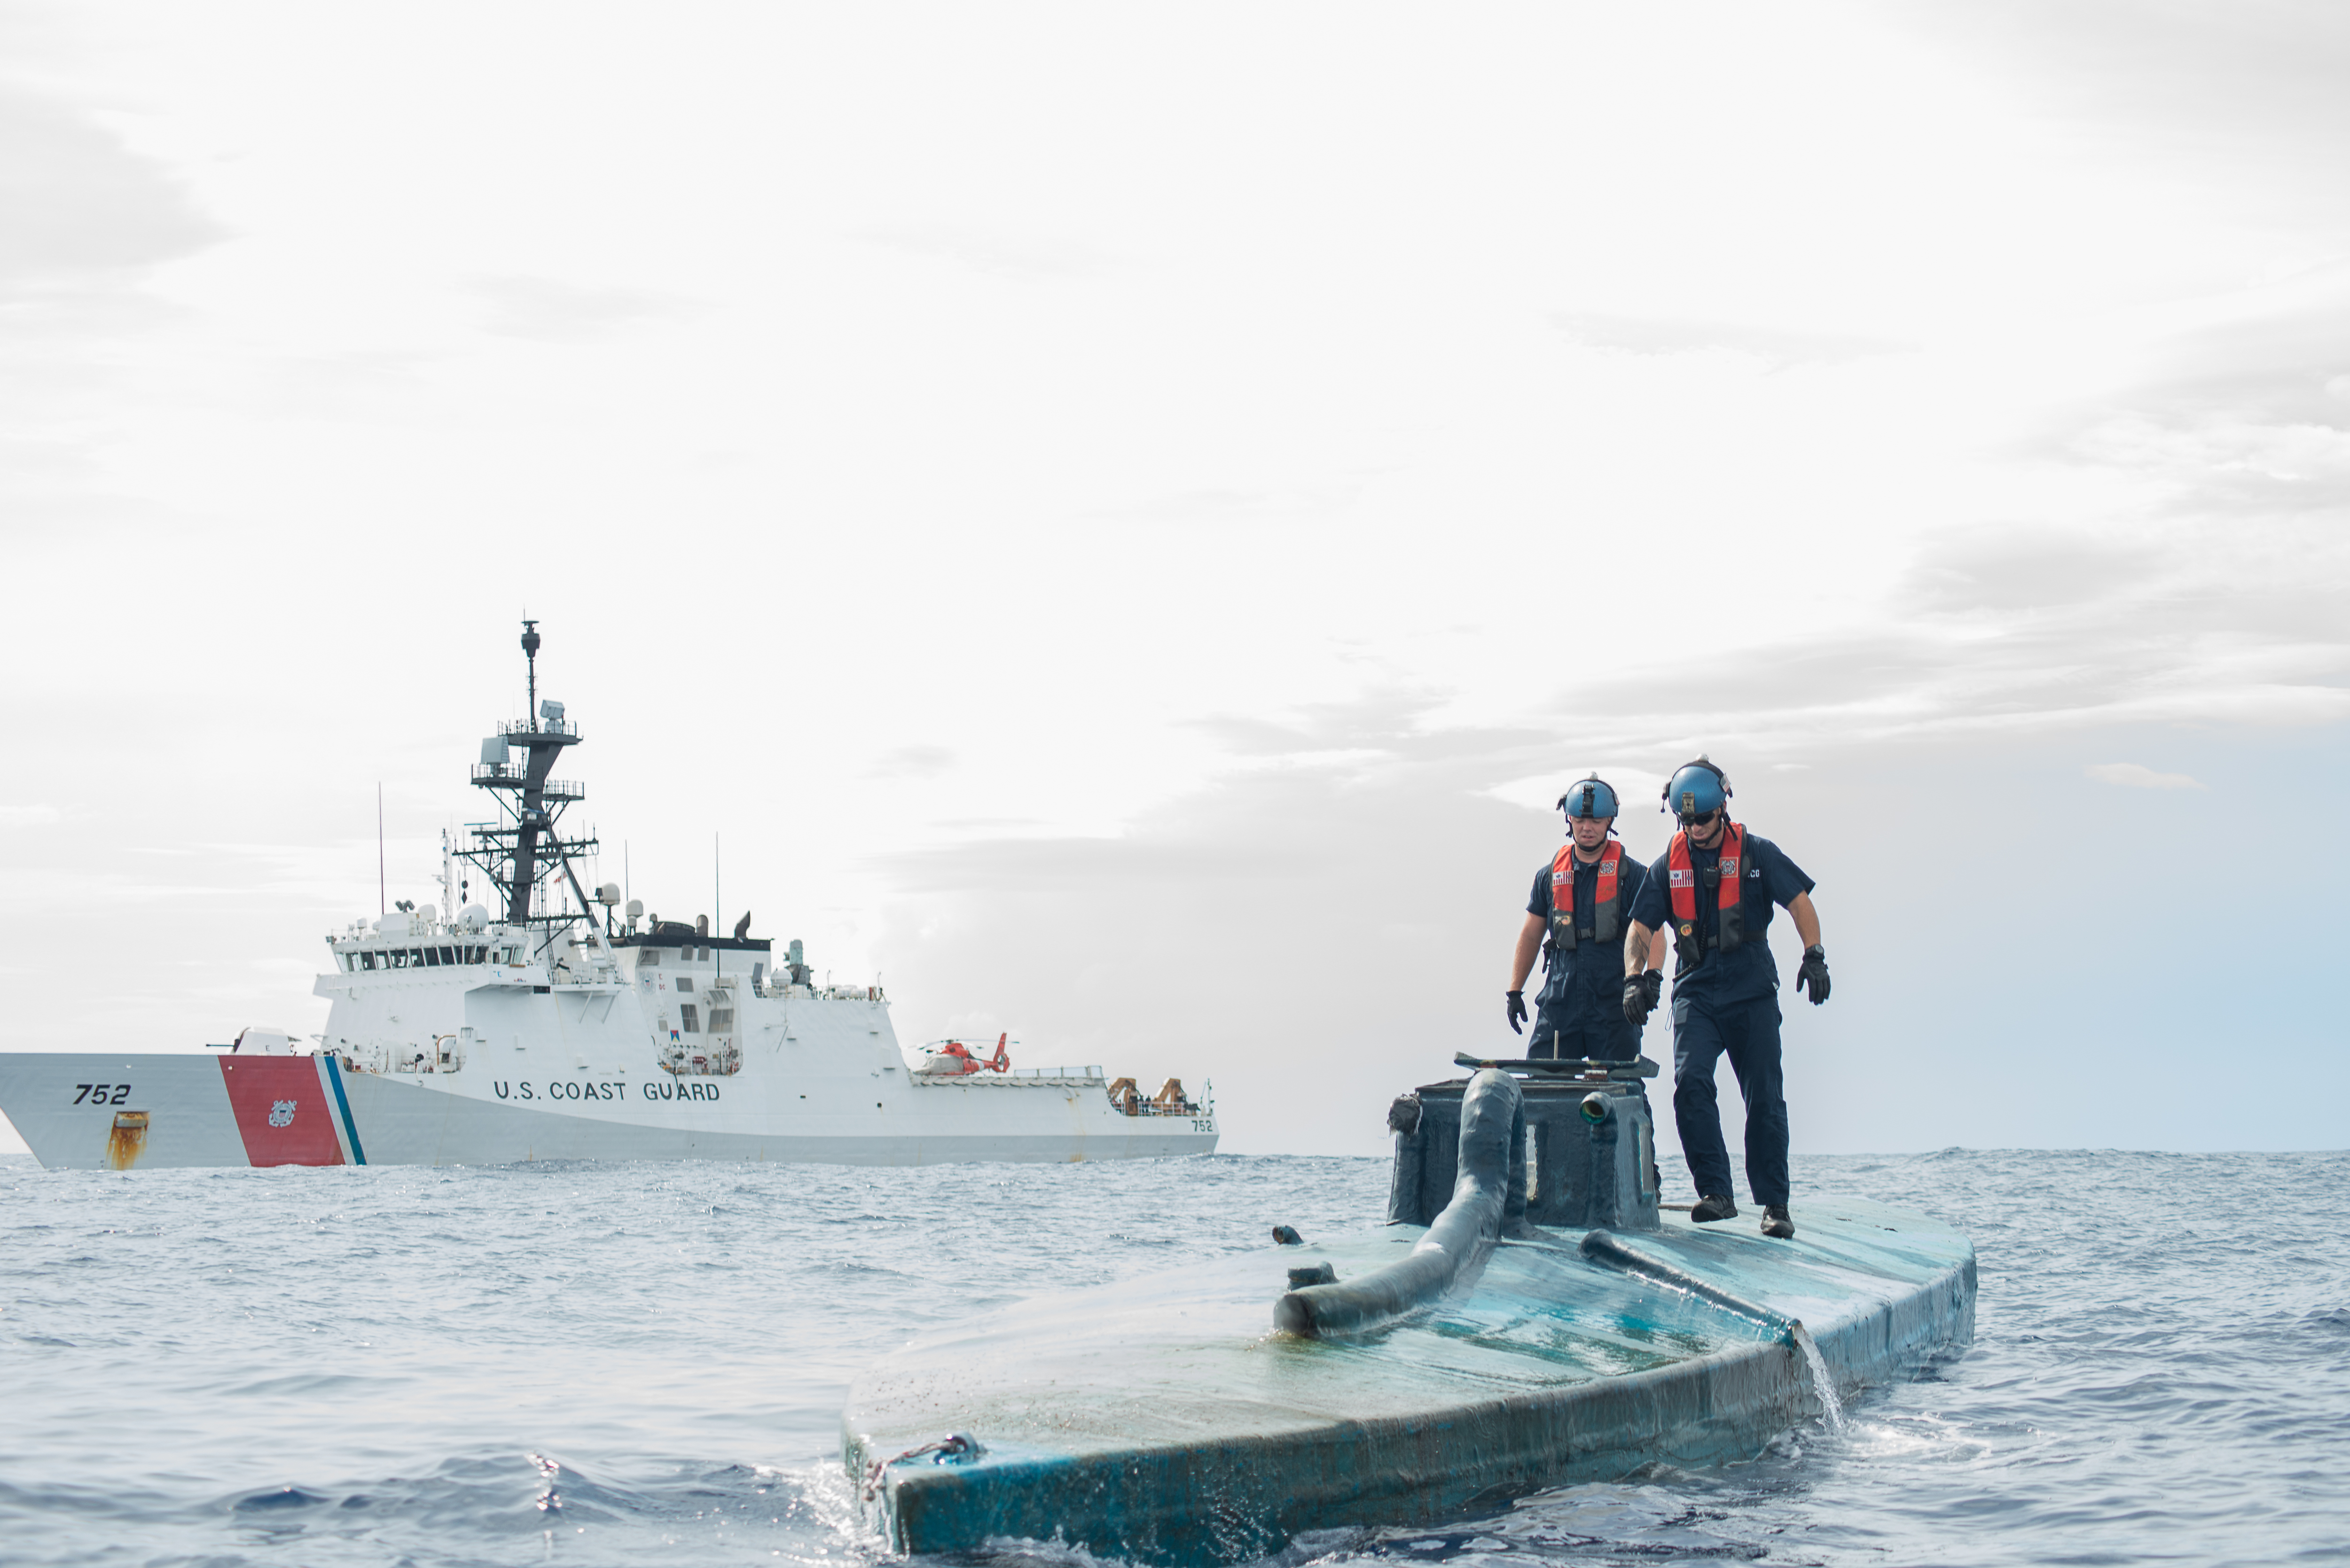 A Coast Guard Cutter Stratton boarding team investigates a self-propelled semi-submersible interdicted in international waters off the coast of Central America on July 19, 2015. US Coast Guard Photo